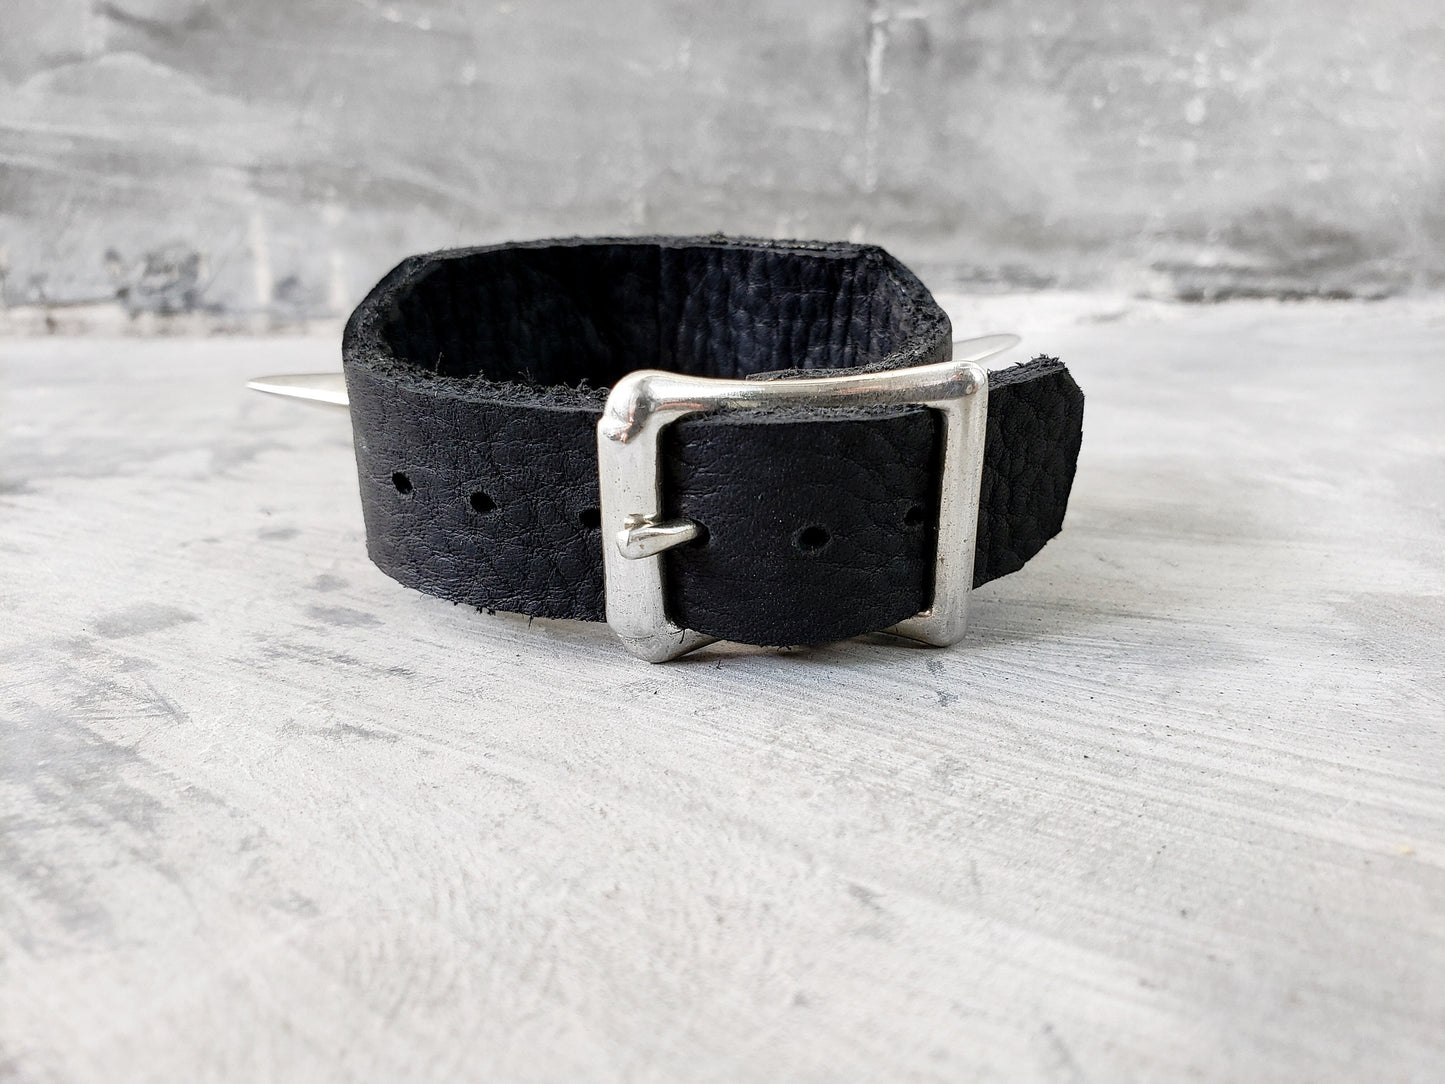 The Futurist Giant Spiked Black Leather Cuff